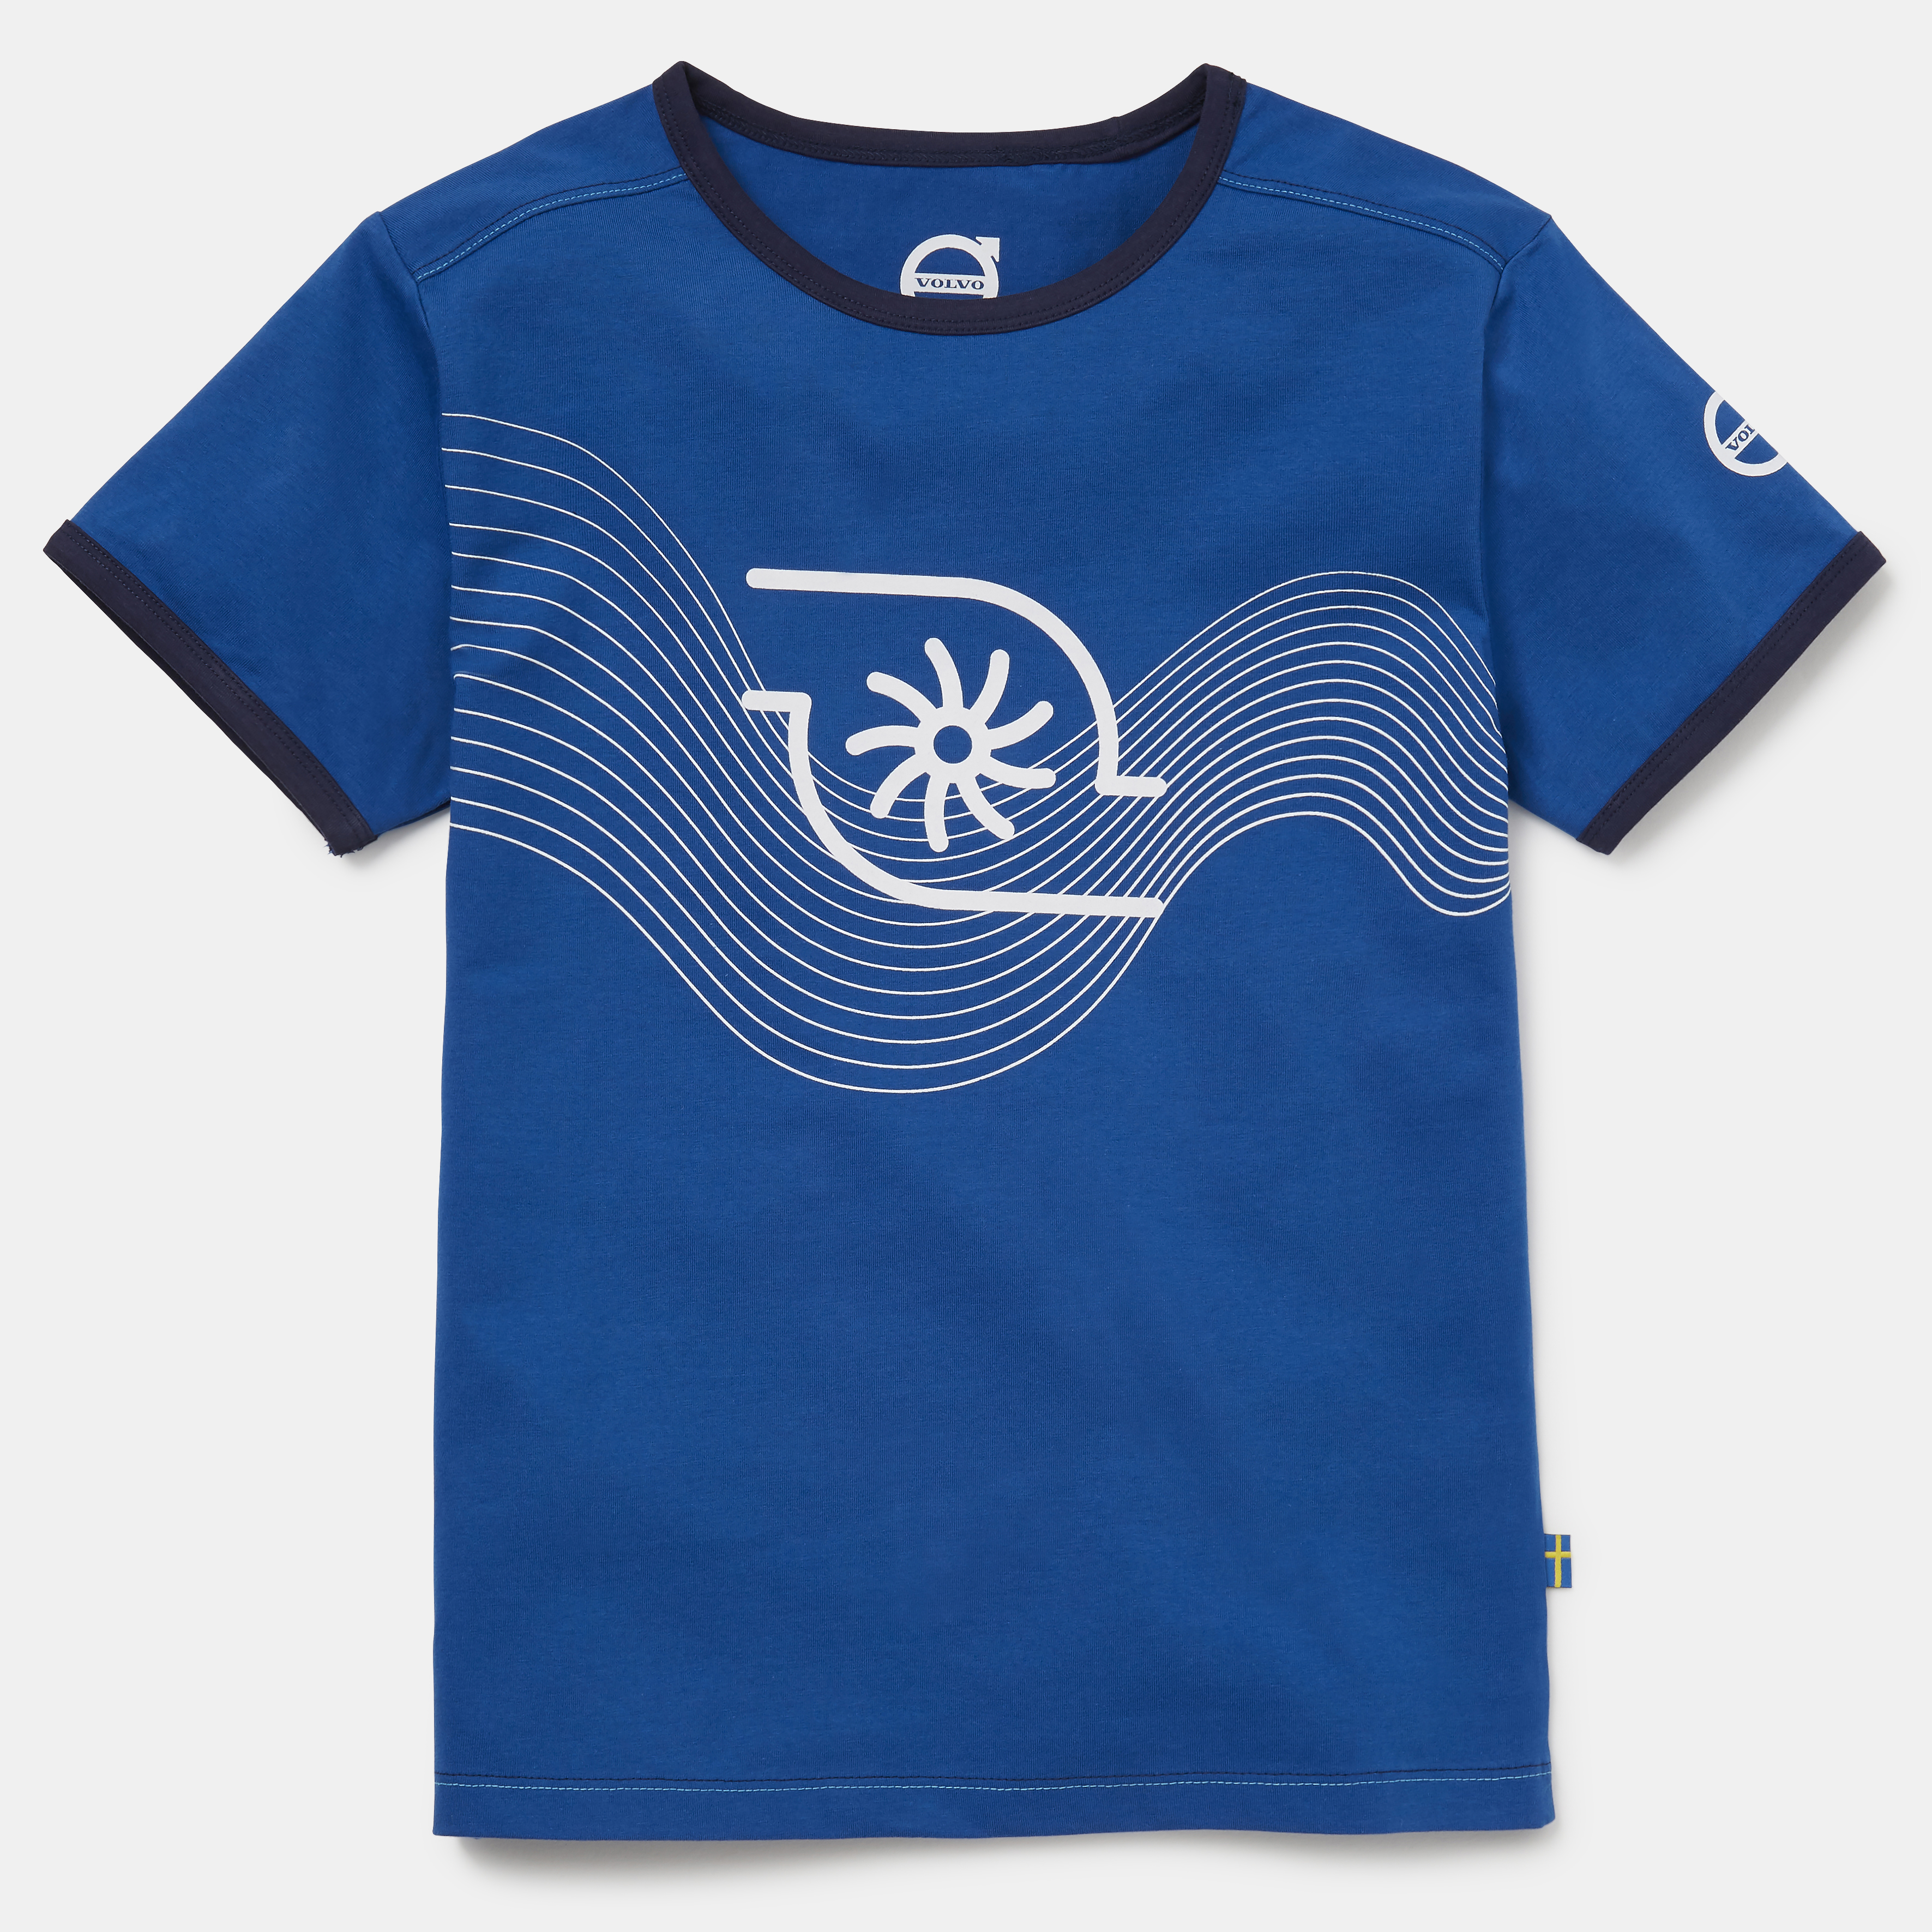 T-SHIRT YOUNGSTER KIDS - VOLVO IRON MARK - BLUE - 158/164